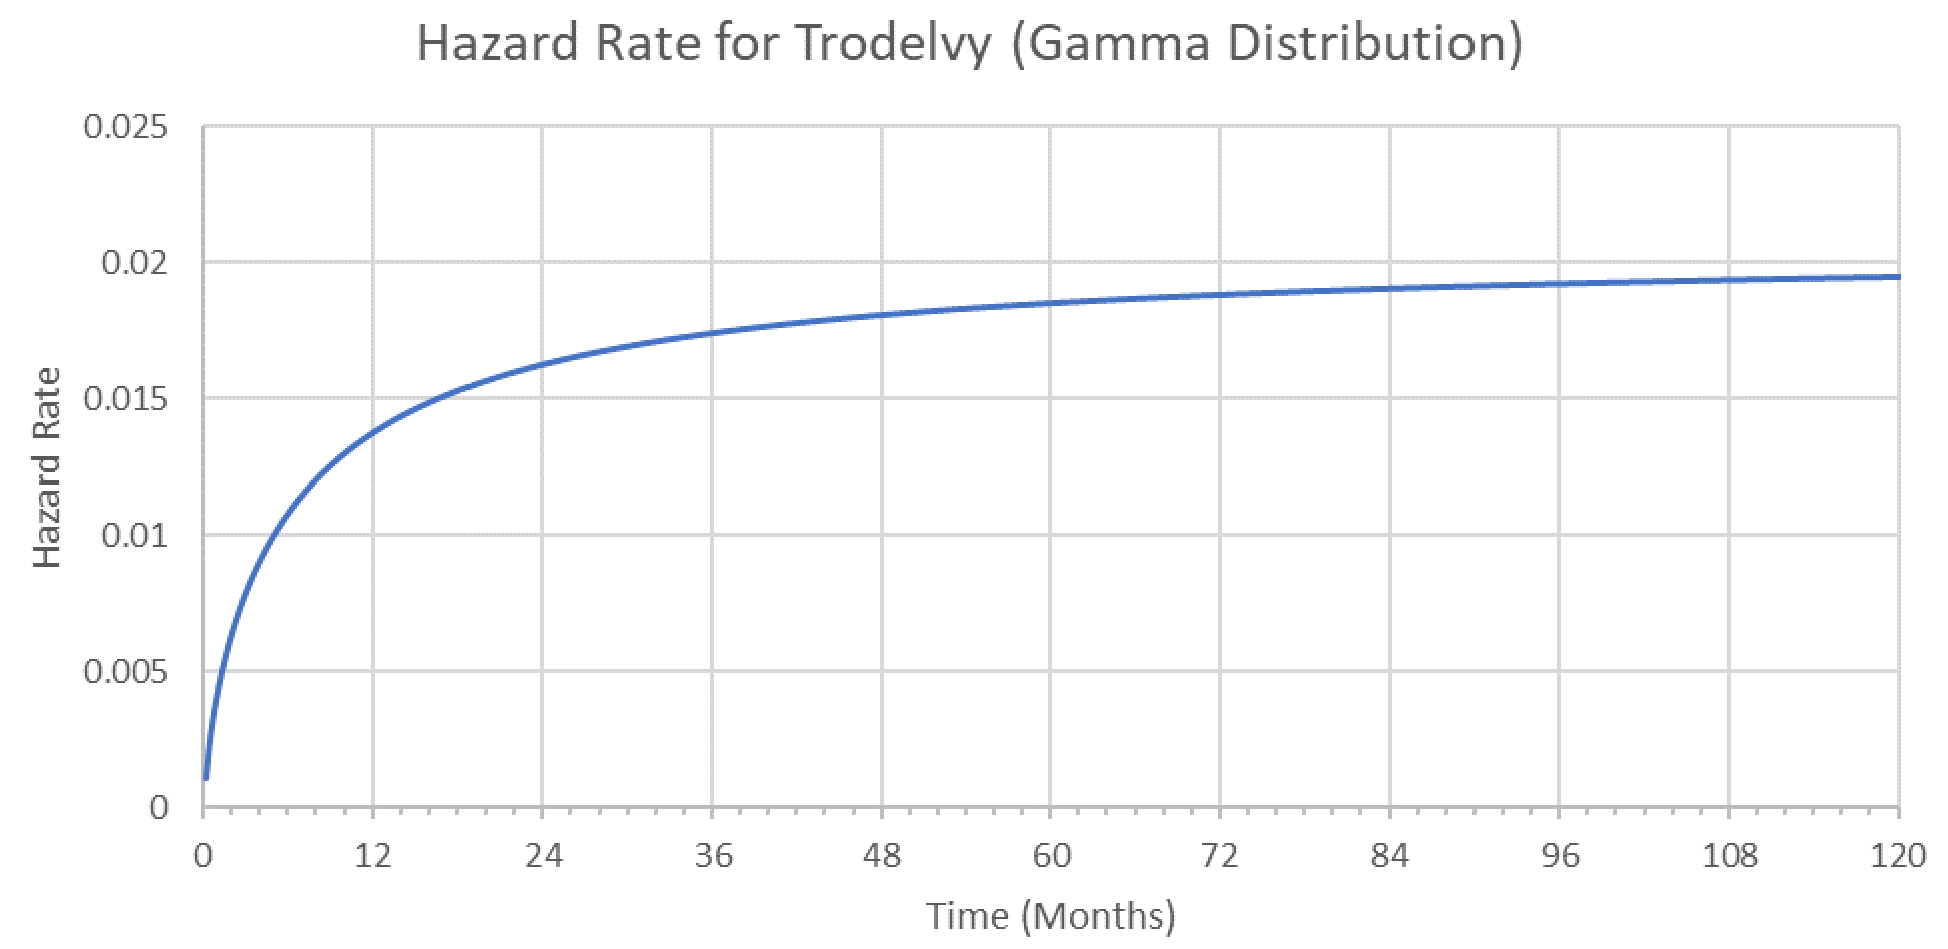 The figure represents how the hazard rate changes over time using a Gamma parametric fit. The y-axis is the hazard rate with a higher value indicating a higher risk of death. The x-axis is time in months.